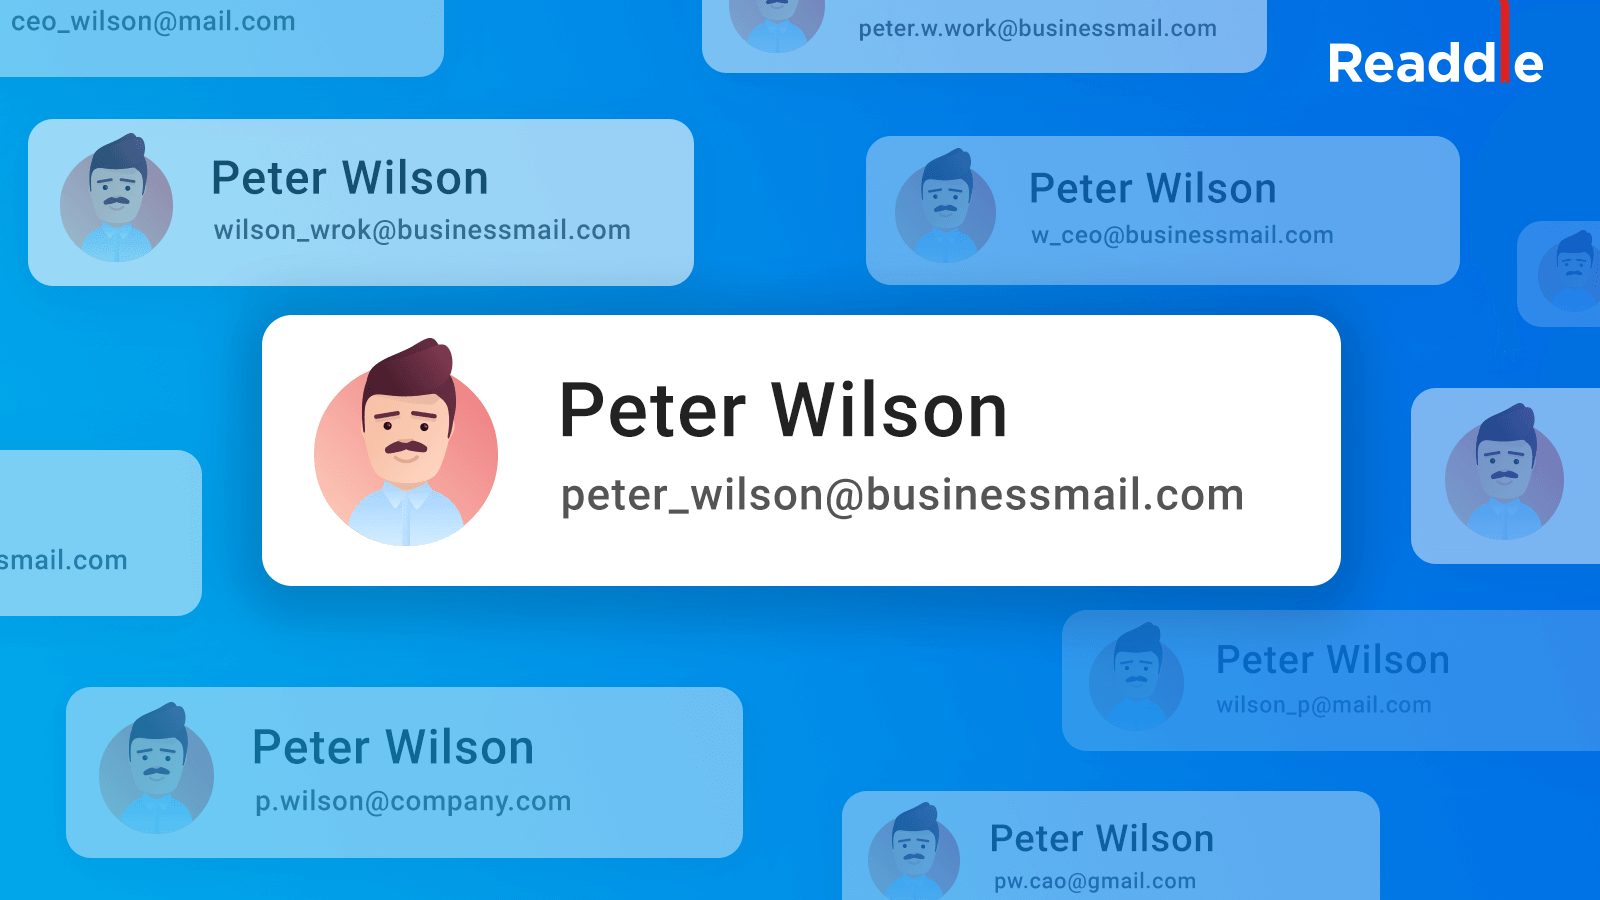 How to Create a Professional Email Address | Ideas & Examples